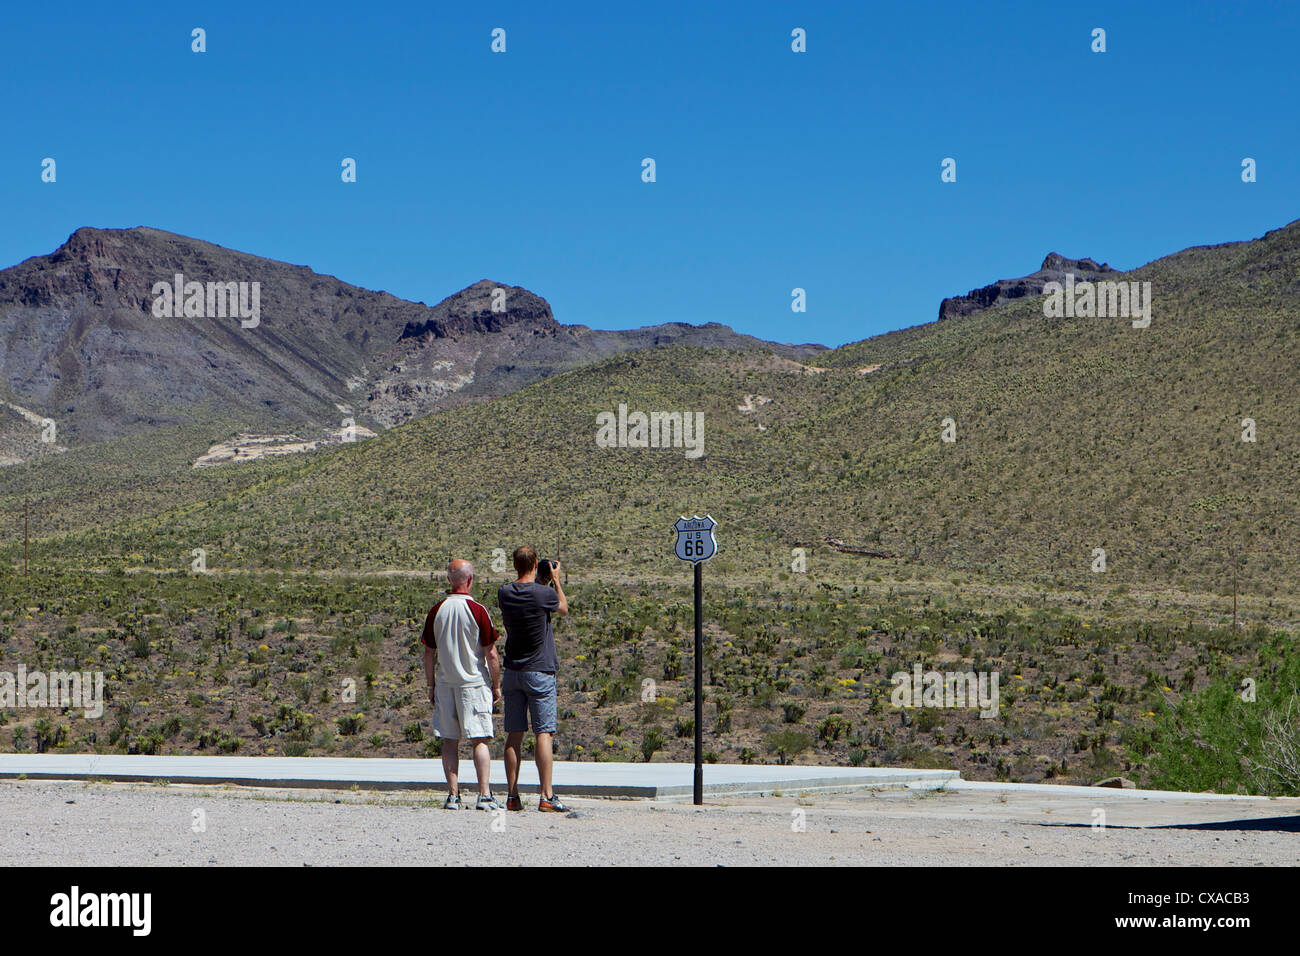 Tourists taking a picture of a Route 66 sign in the Arizona desert at Cool Springs Station near Kingman, Arizona Stock Photo